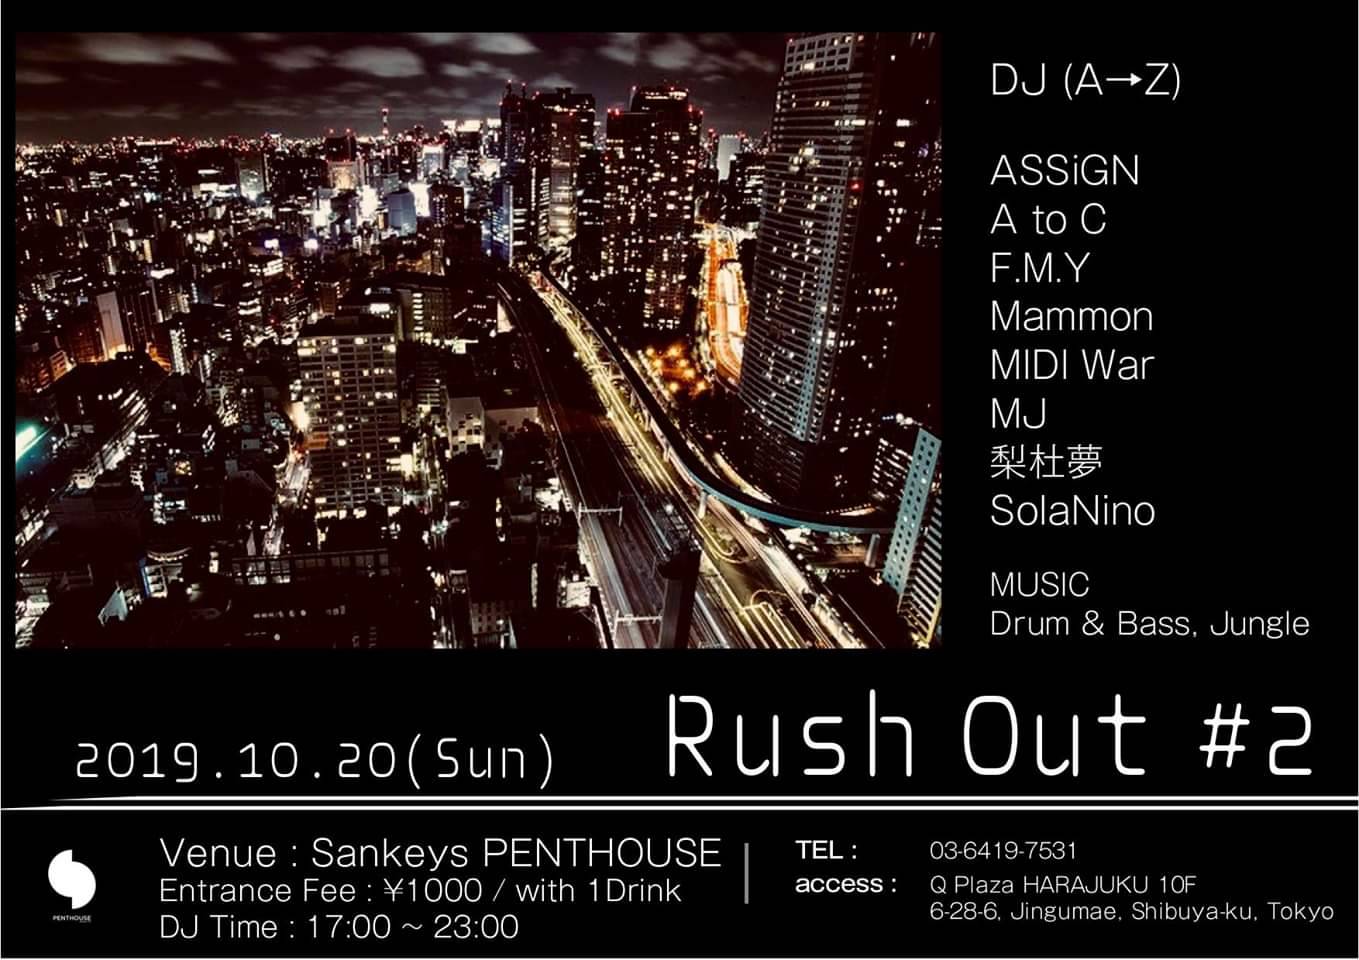 Rush Out #2